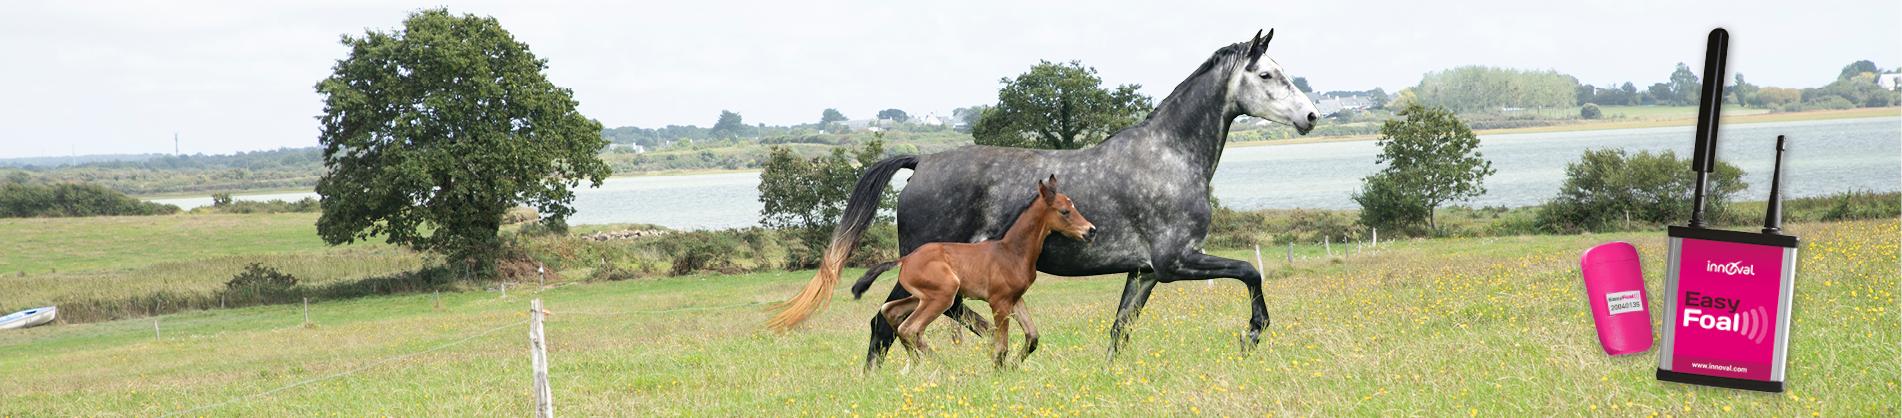 Easyfoal, efficiency and simplicity for foaling